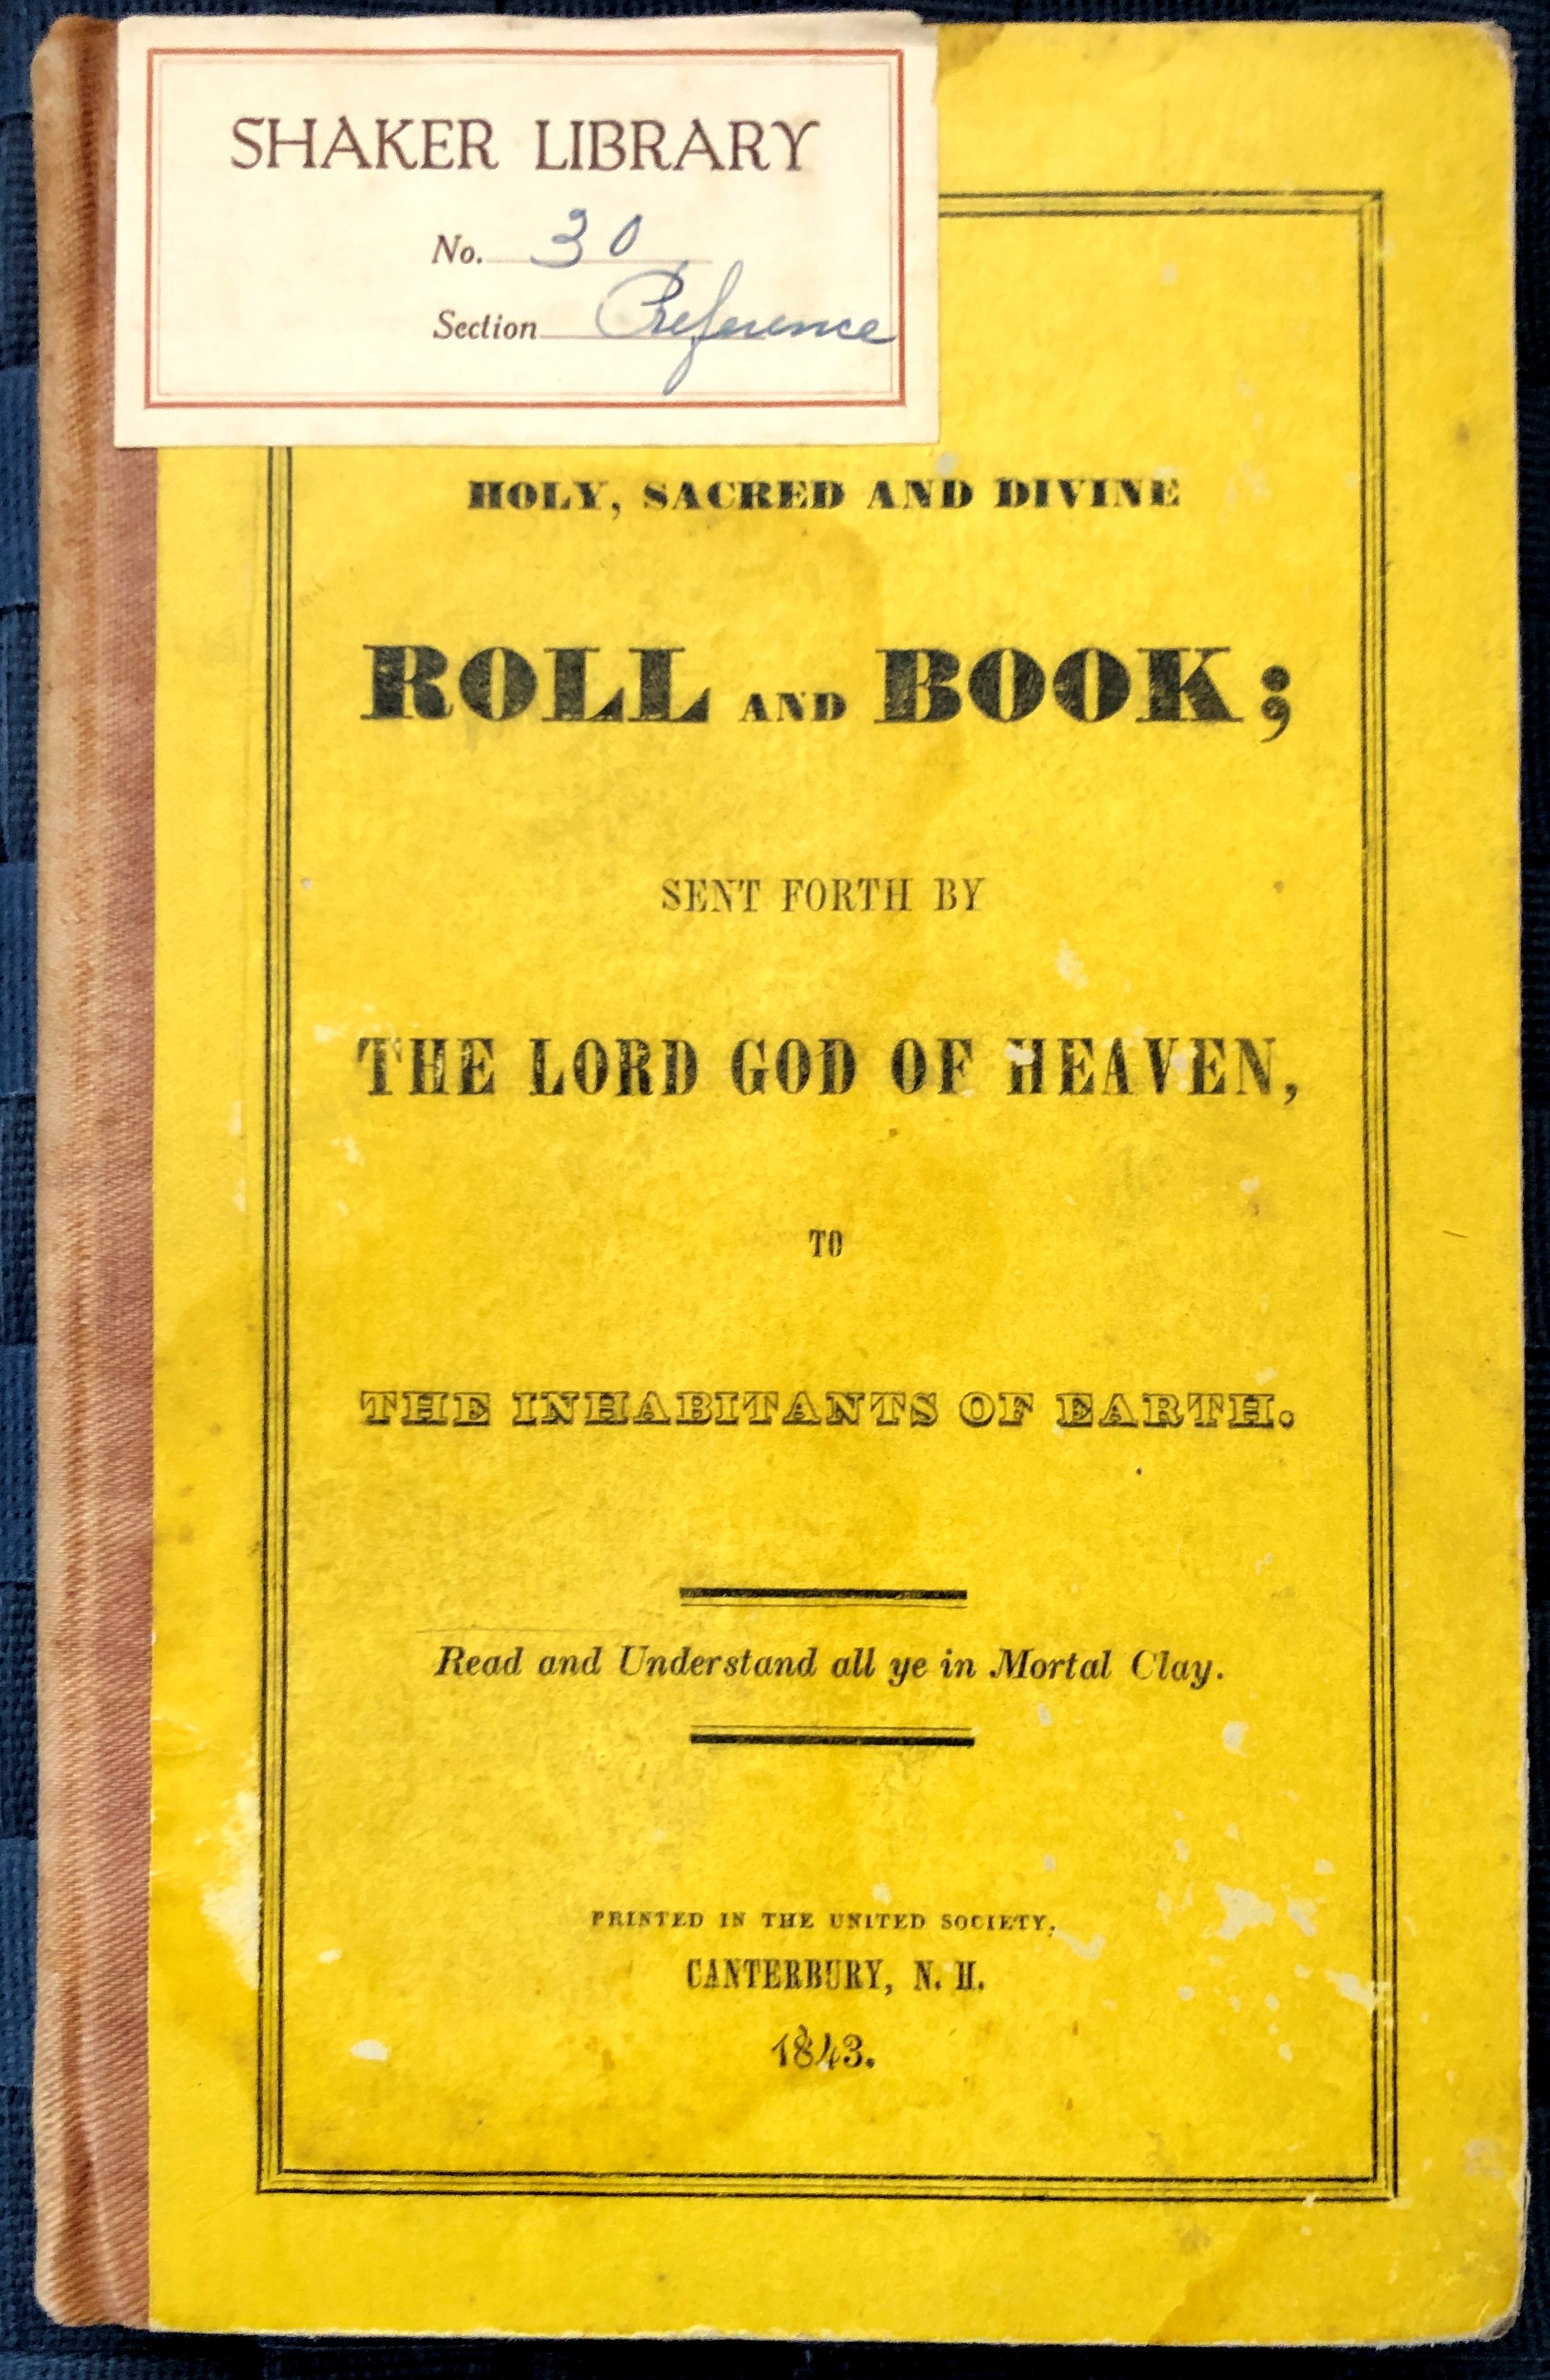 Roll n book, the lord god of heaven.